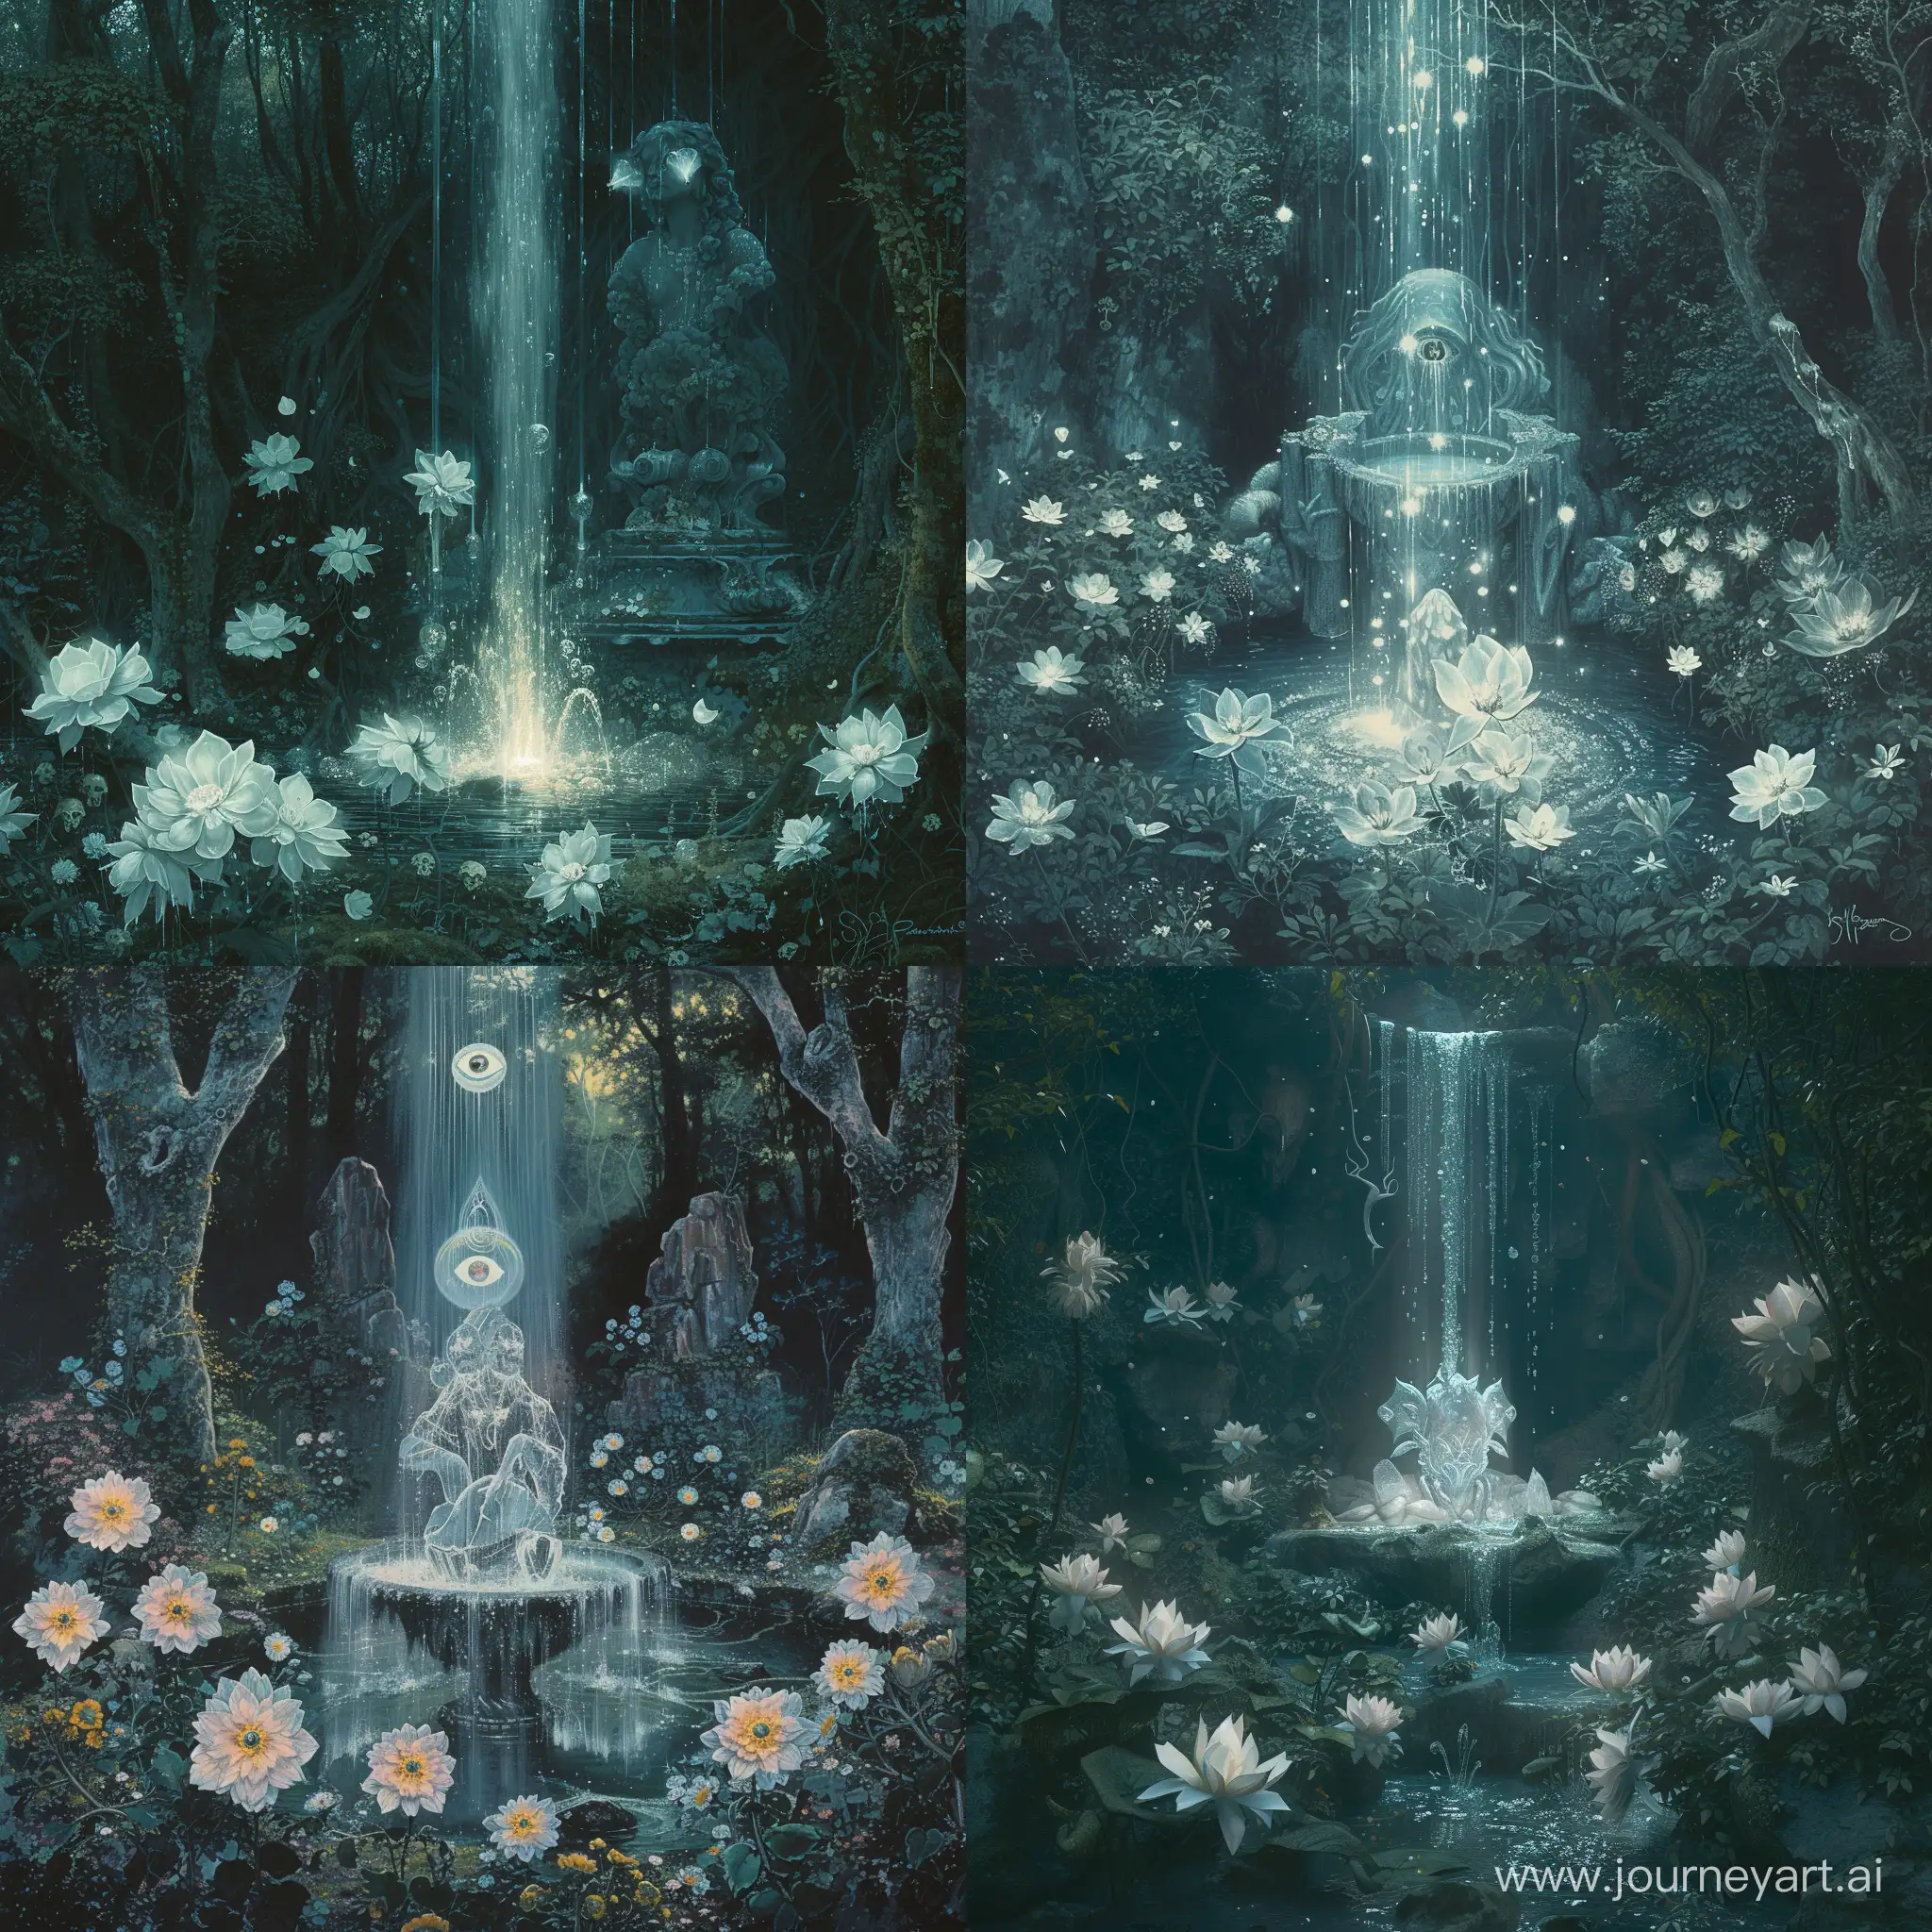 Ethereal-Fountain-of-Immortality-in-a-1970s-Dark-Fantasy-Forest